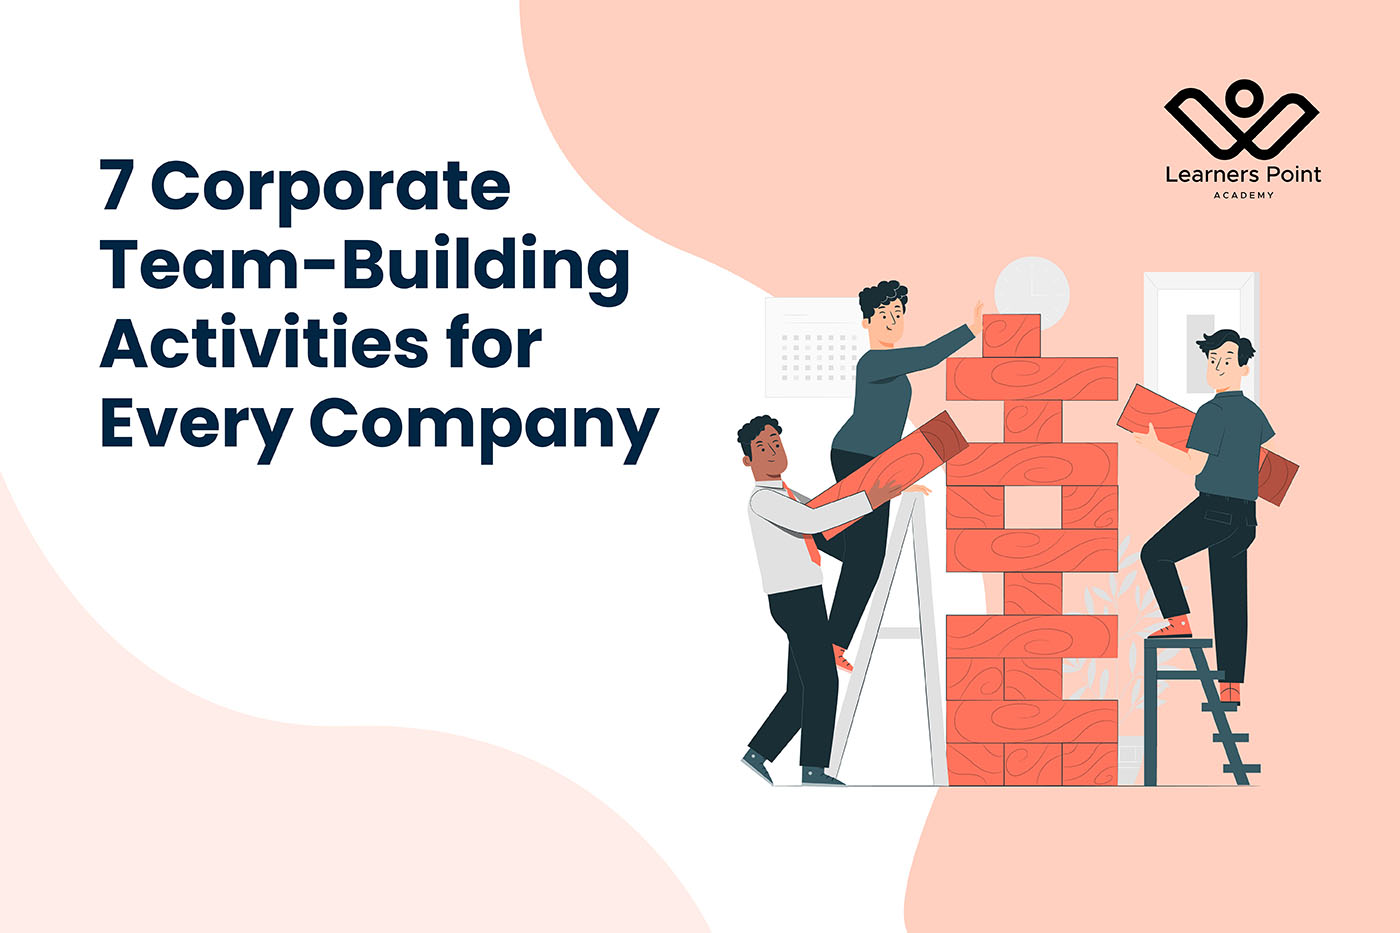 7 Corporate Team-Building Activities for Every Company